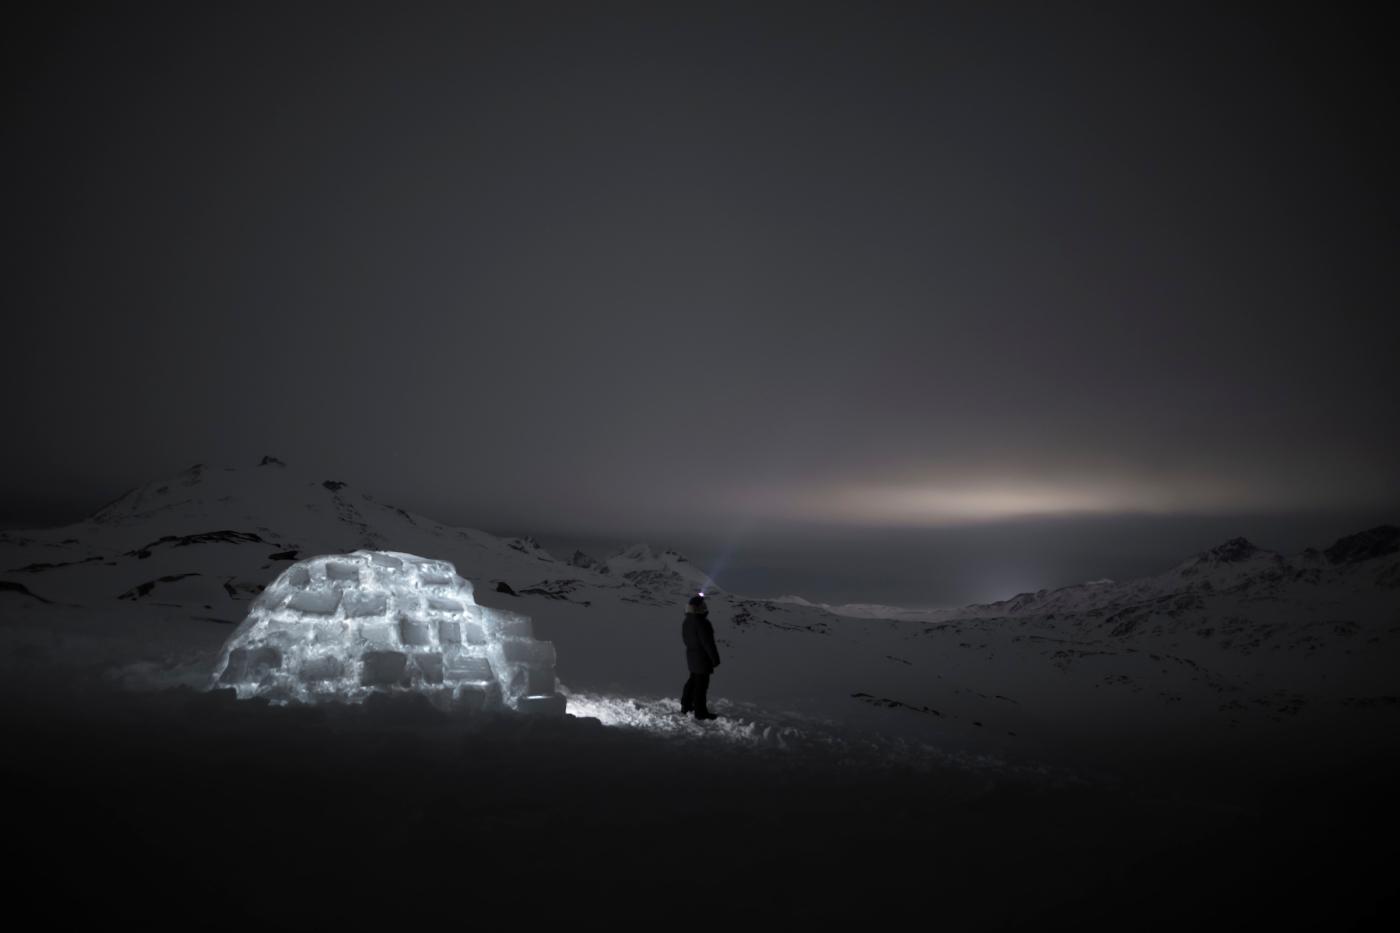 Igloo camping view by the dark night. Photo by Aningaaq Rosing Carlsen - Visit Greenland